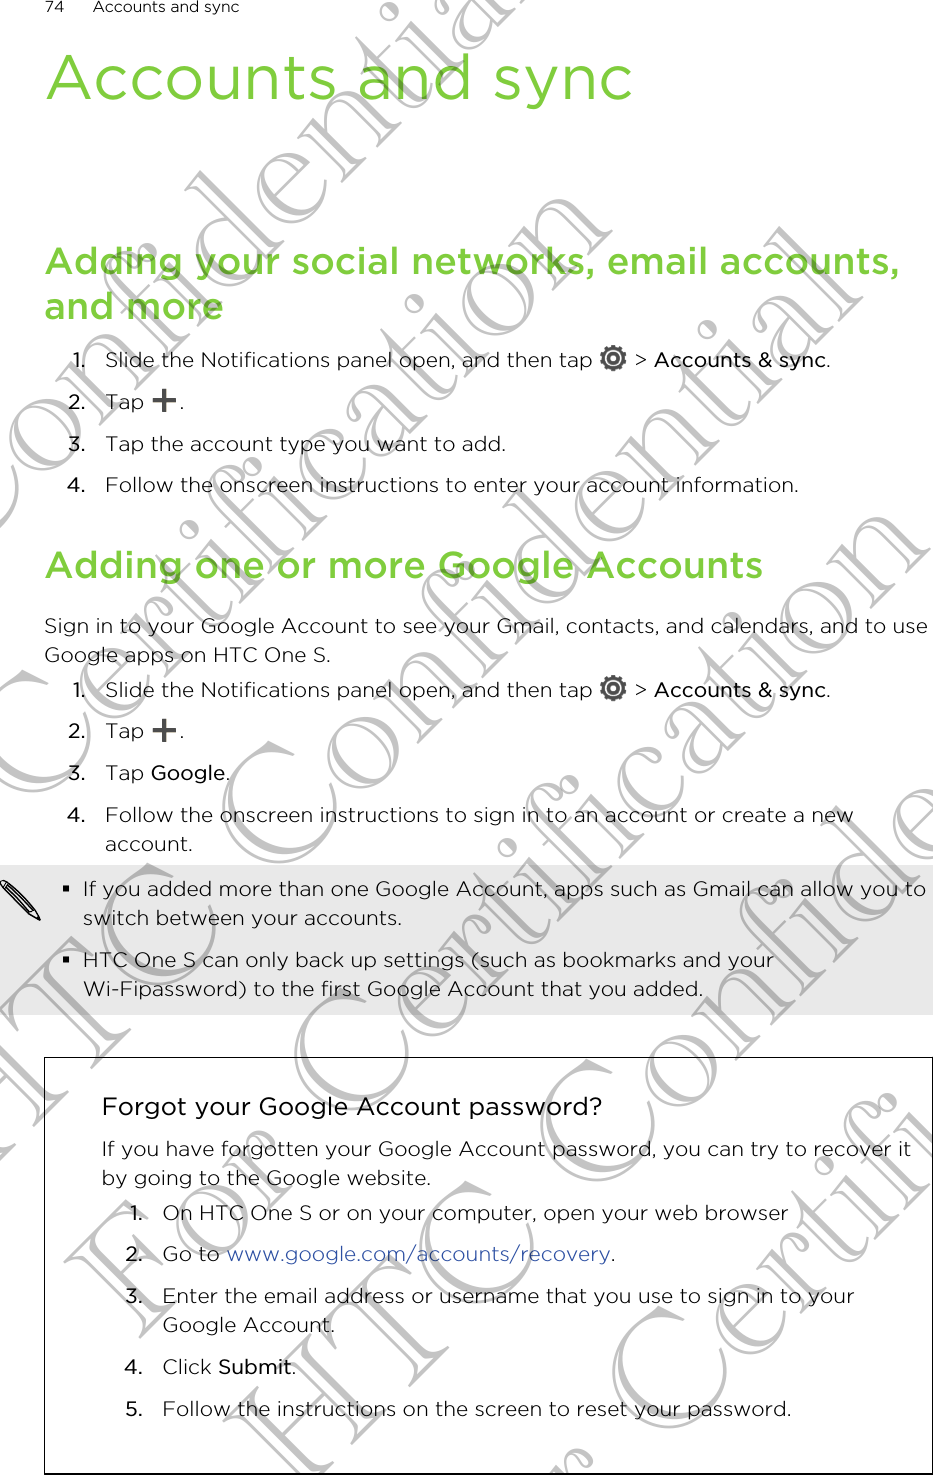 Accounts and syncAdding your social networks, email accounts,and more1. Slide the Notifications panel open, and then tap   &gt; Accounts &amp; sync.2. Tap  .3. Tap the account type you want to add.4. Follow the onscreen instructions to enter your account information.Adding one or more Google AccountsSign in to your Google Account to see your Gmail, contacts, and calendars, and to useGoogle apps on HTC One S.1. Slide the Notifications panel open, and then tap   &gt; Accounts &amp; sync.2. Tap  .3. Tap Google.4. Follow the onscreen instructions to sign in to an account or create a newaccount.§If you added more than one Google Account, apps such as Gmail can allow you toswitch between your accounts.§HTC One S can only back up settings (such as bookmarks and yourWi-Fipassword) to the first Google Account that you added.Forgot your Google Account password?If you have forgotten your Google Account password, you can try to recover itby going to the Google website.1. On HTC One S or on your computer, open your web browser2. Go to www.google.com/accounts/recovery.3. Enter the email address or username that you use to sign in to yourGoogle Account.4. Click Submit.5. Follow the instructions on the screen to reset your password.74 Accounts and syncHTC Confidential For Certification HTC Confidential For Certification HTC Confidential For Certification